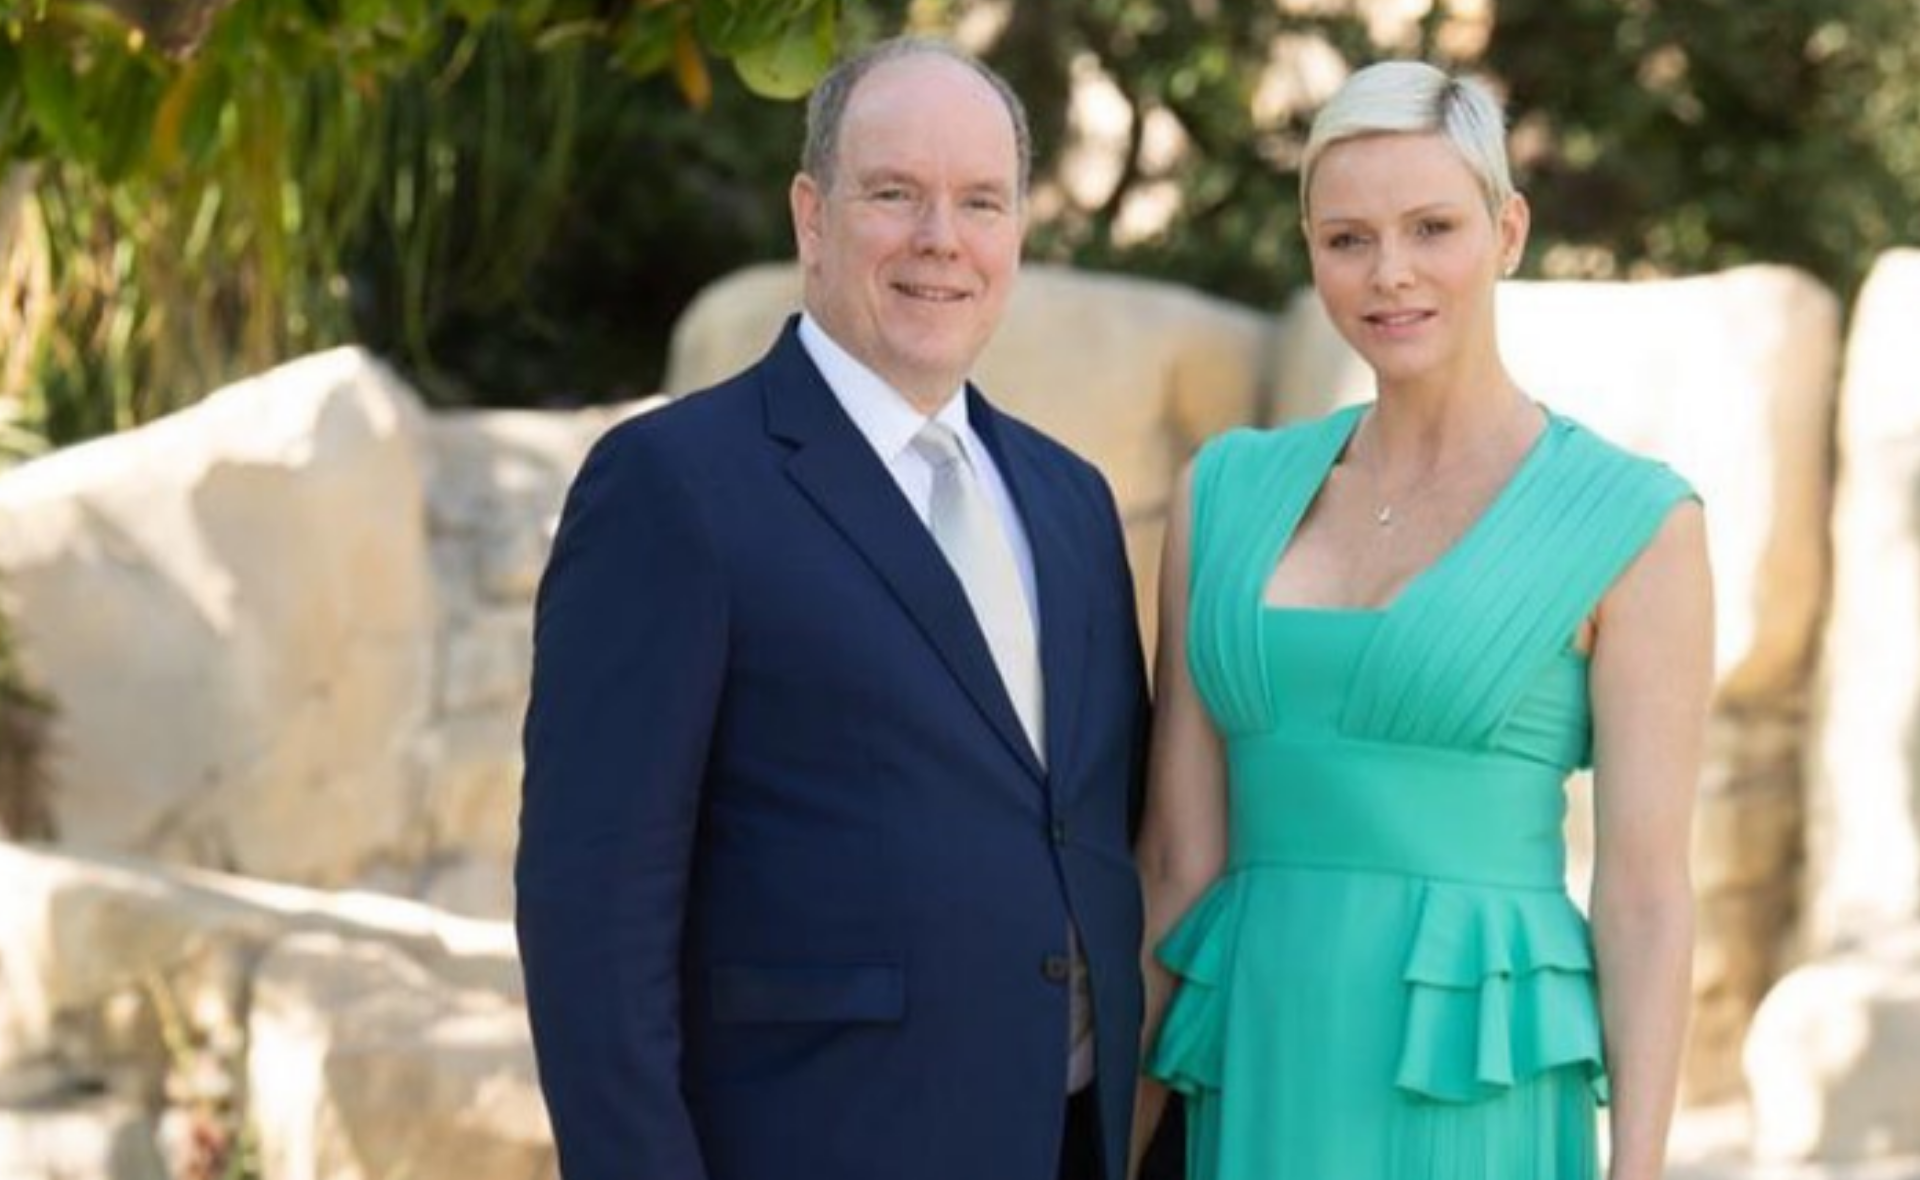 The details you may have missed in Princess Charlene and Prince Albert of Monaco’s new wedding anniversary photo